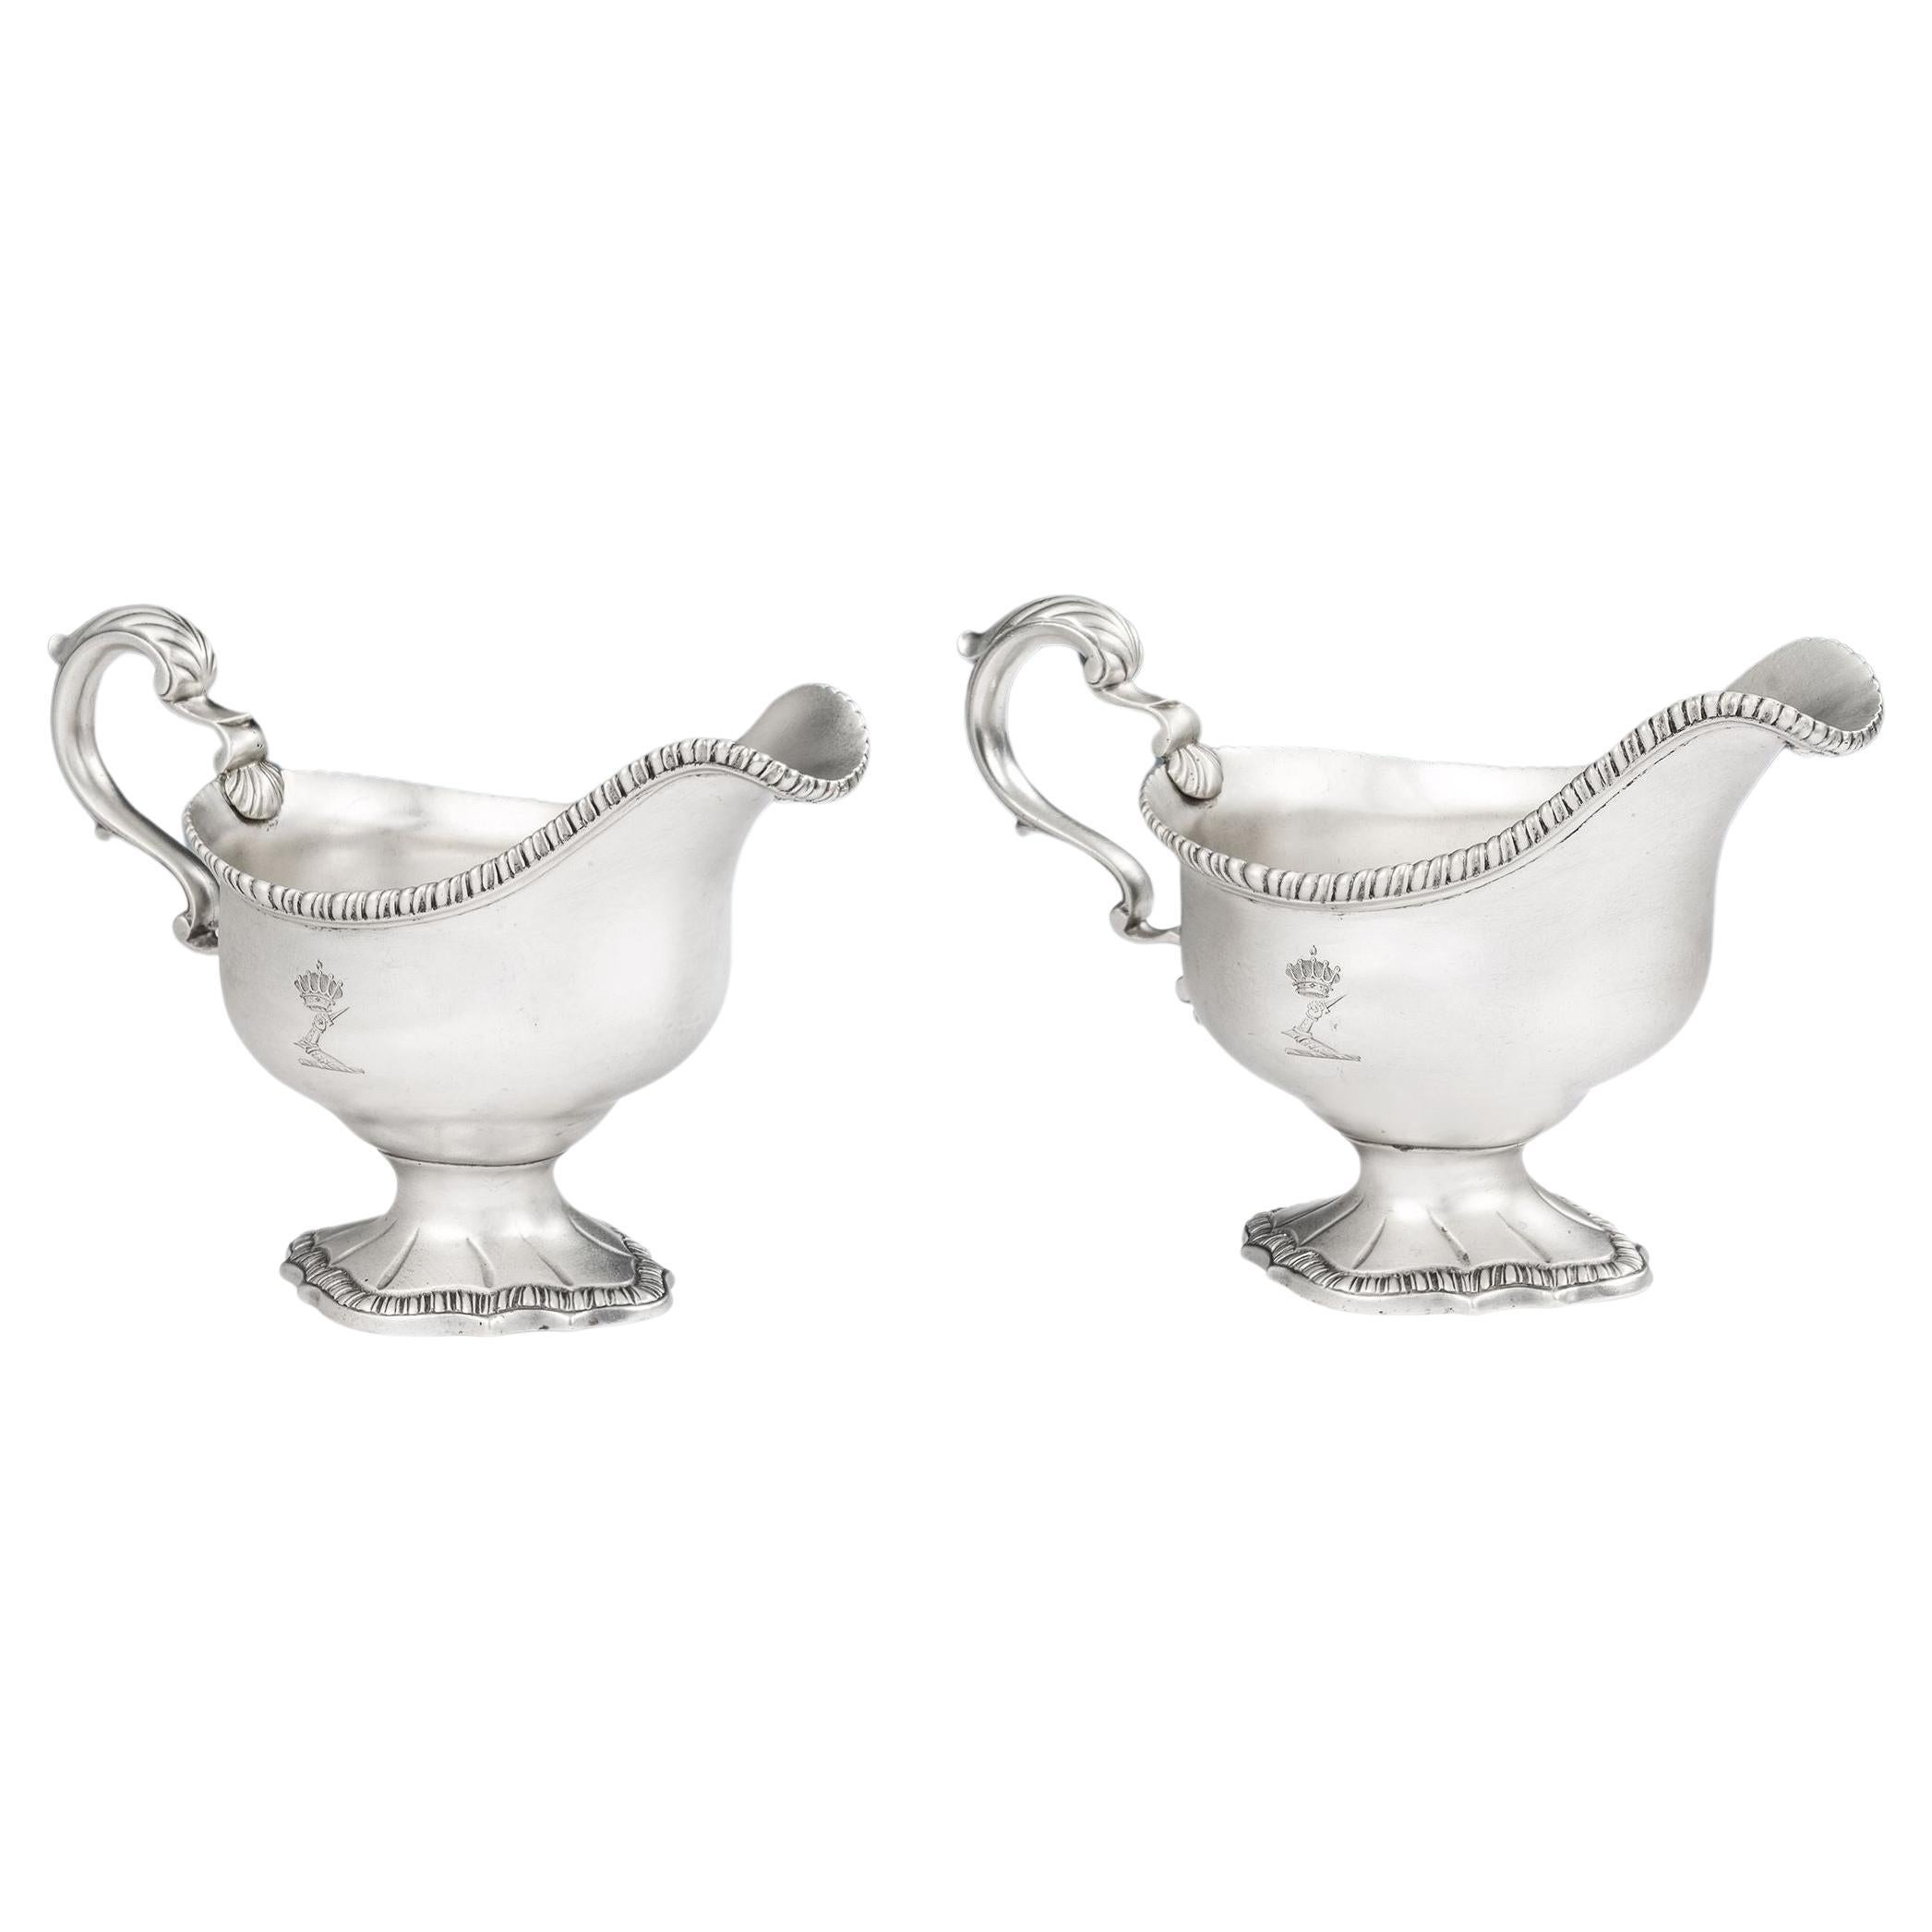 Pair of Early George III Dessert Boats Made in London by William Skeen, 1769